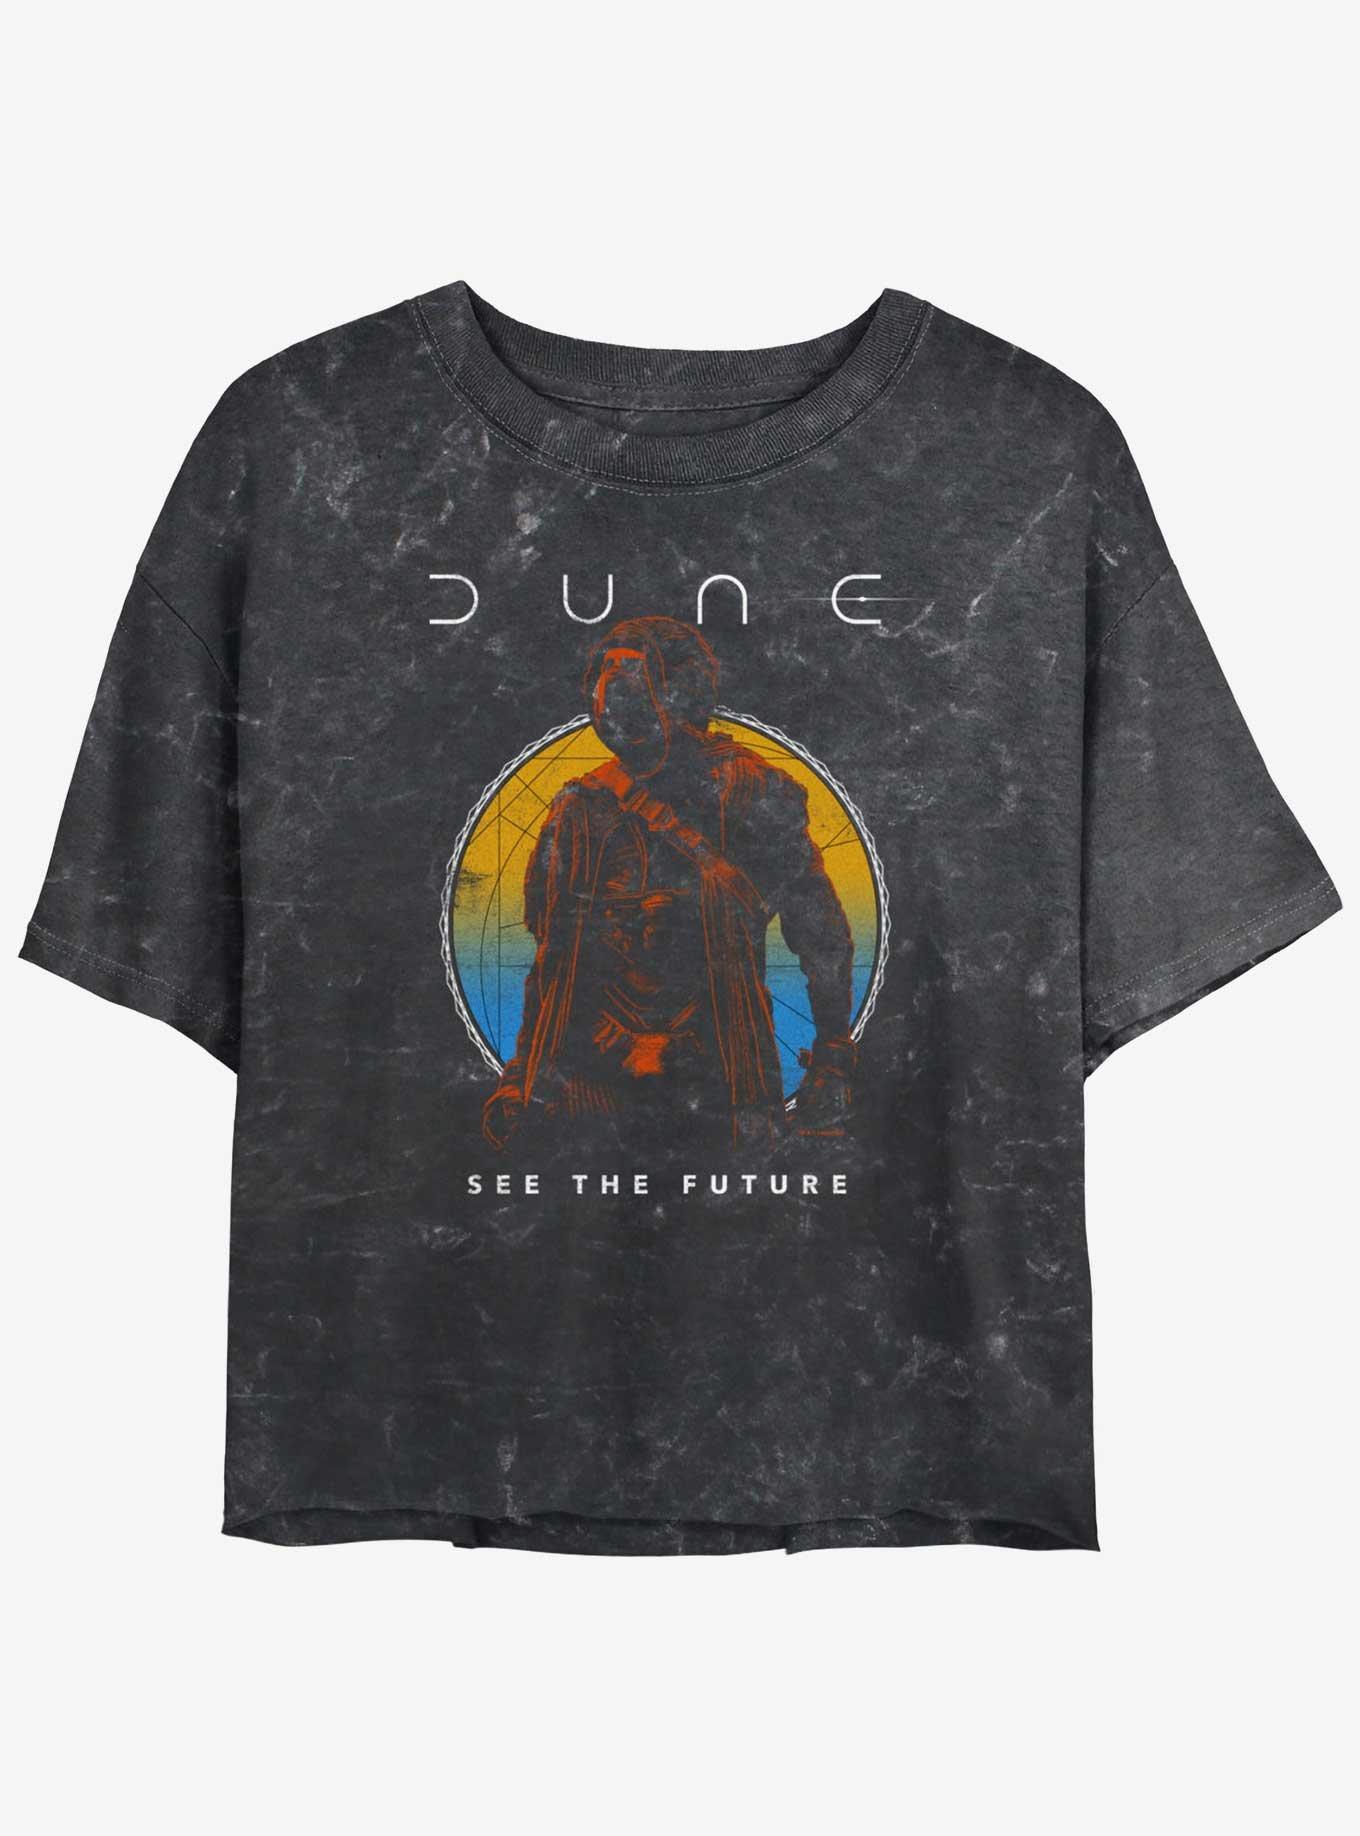 Dune: Part Two See The Future Mineral Wash Girls Crop T-Shirt, BLACK, hi-res